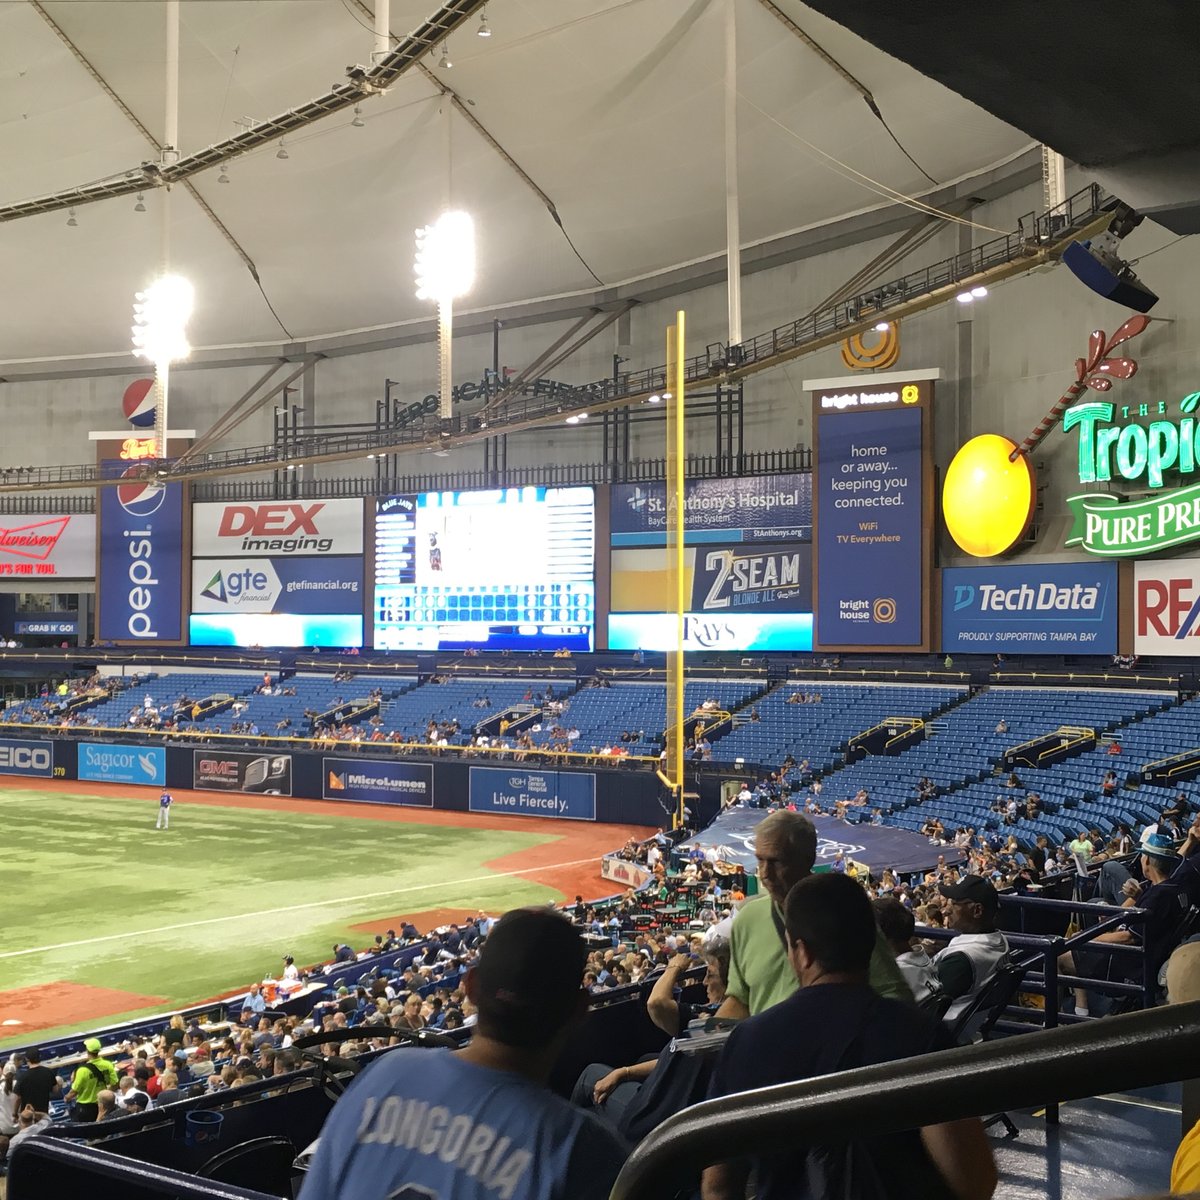 FULL HOUSE! Tampa Bay Rays Fans Pack the Trop